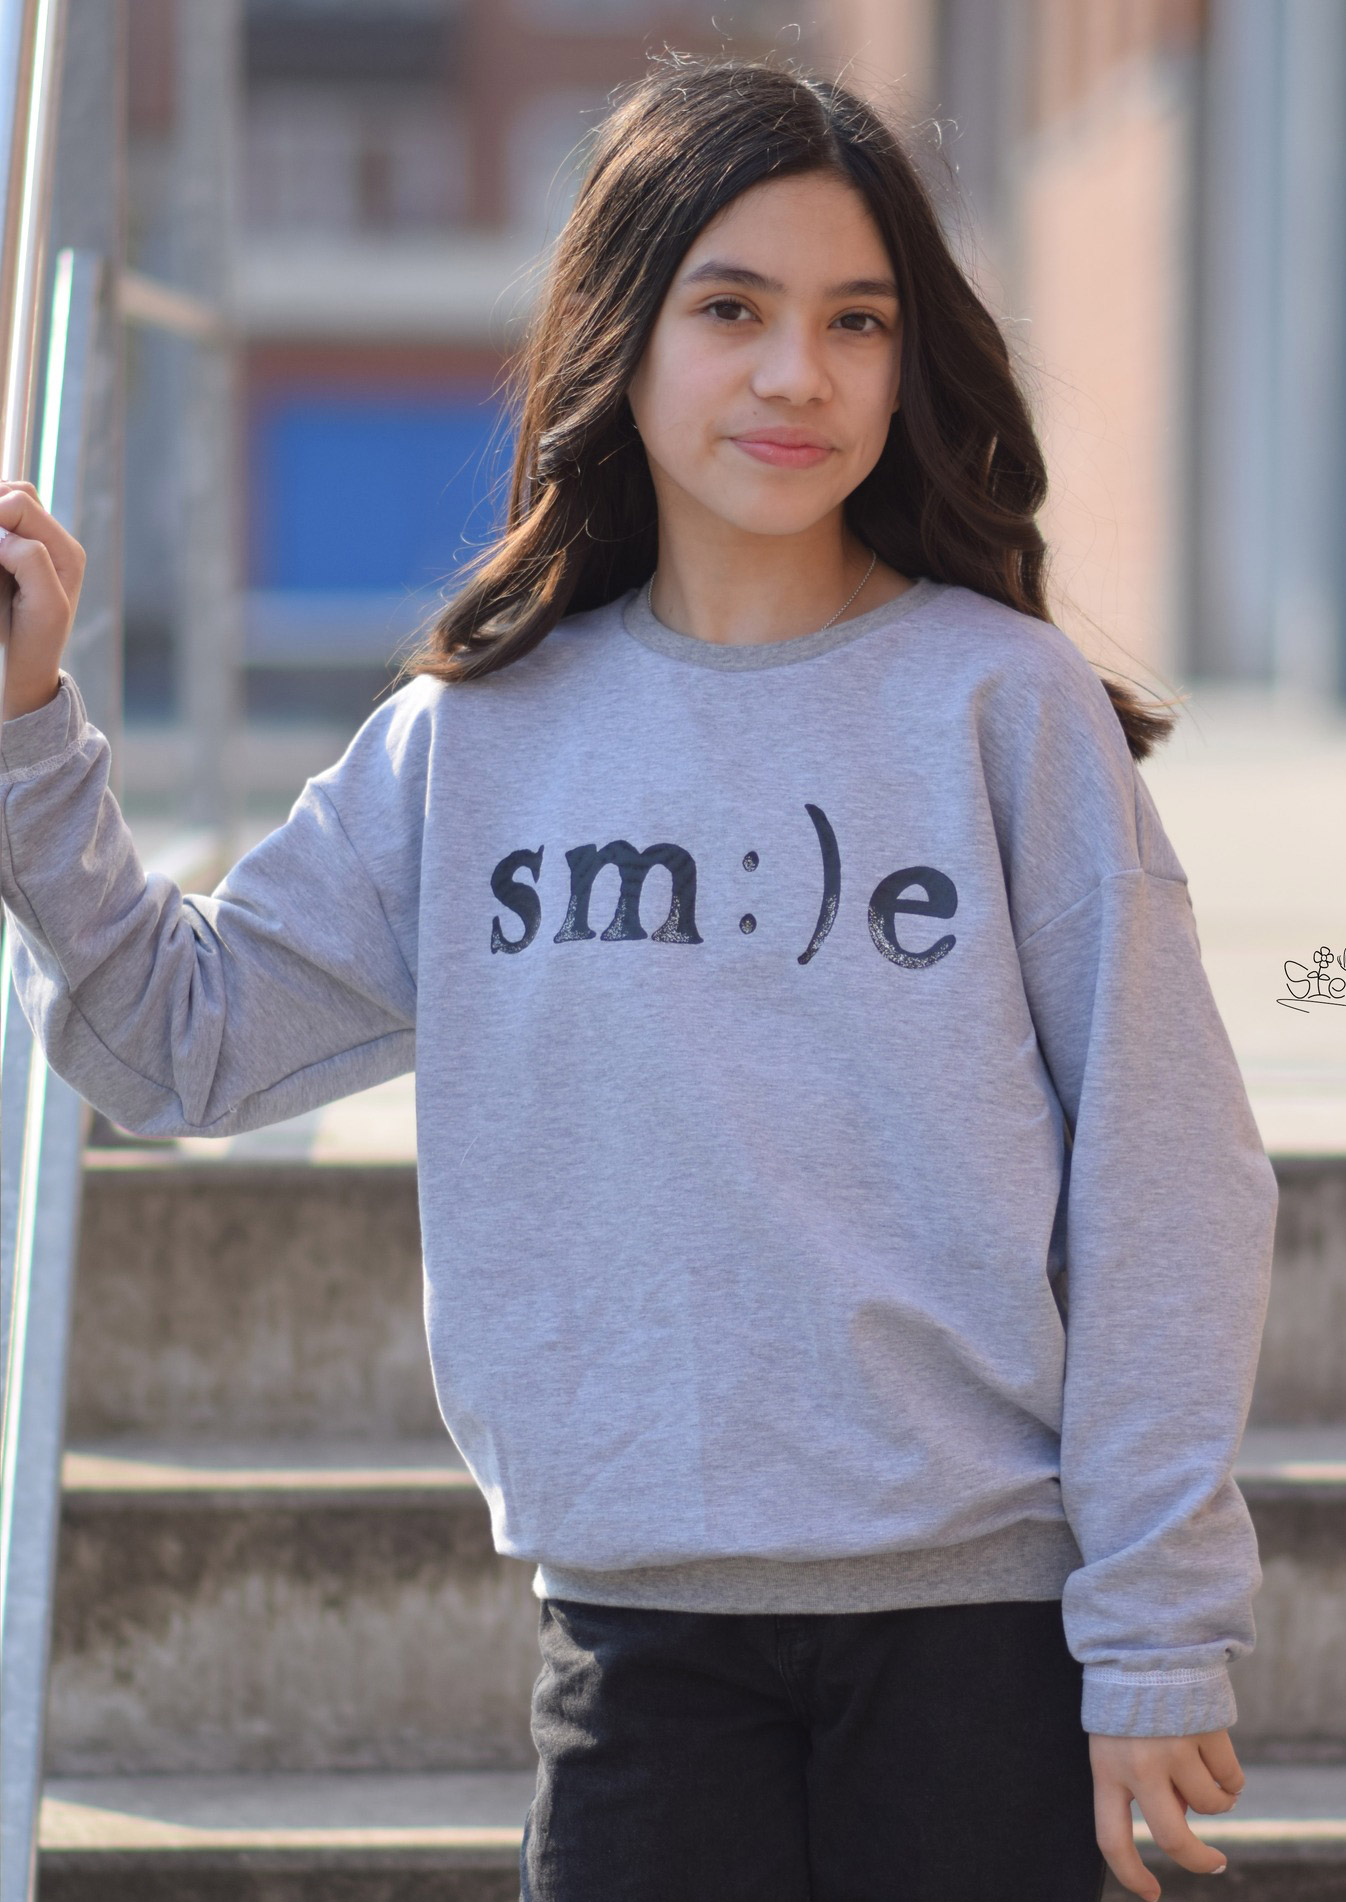 Snyggli-Ebook-Oversized-Sweater-Surf-Gr.-128-170-Schnittmuster-Nähanleitung-Musselin-Mädchen-french-terry-smile